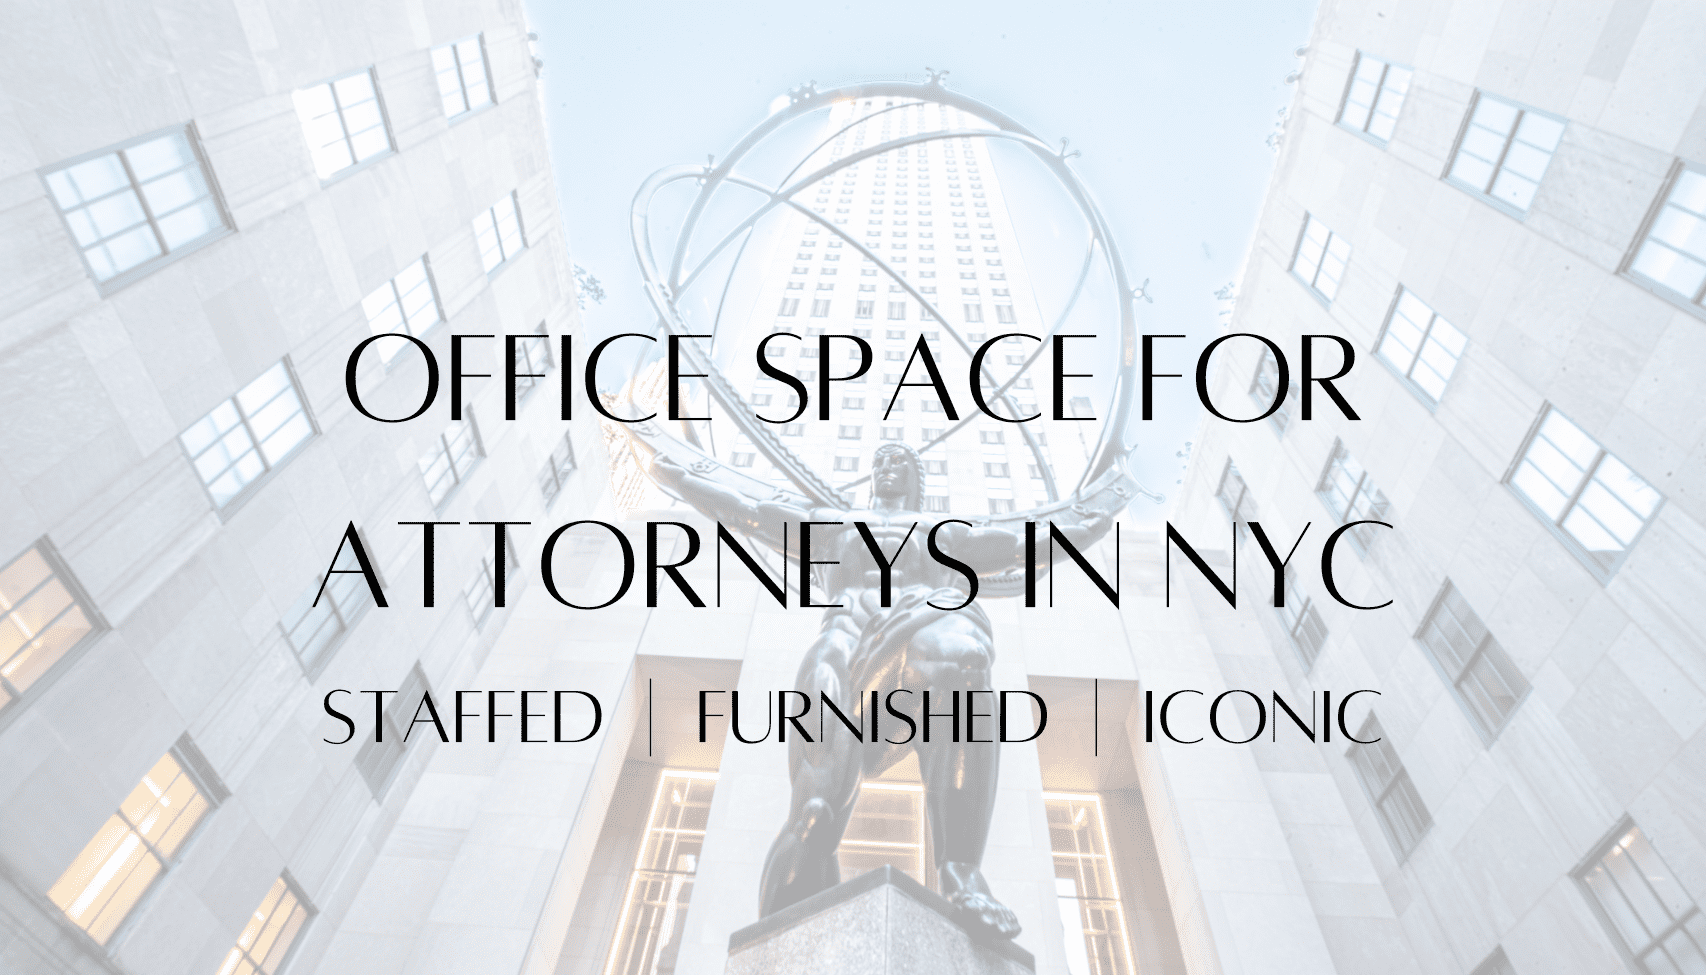 Office space for attorneys in NYC